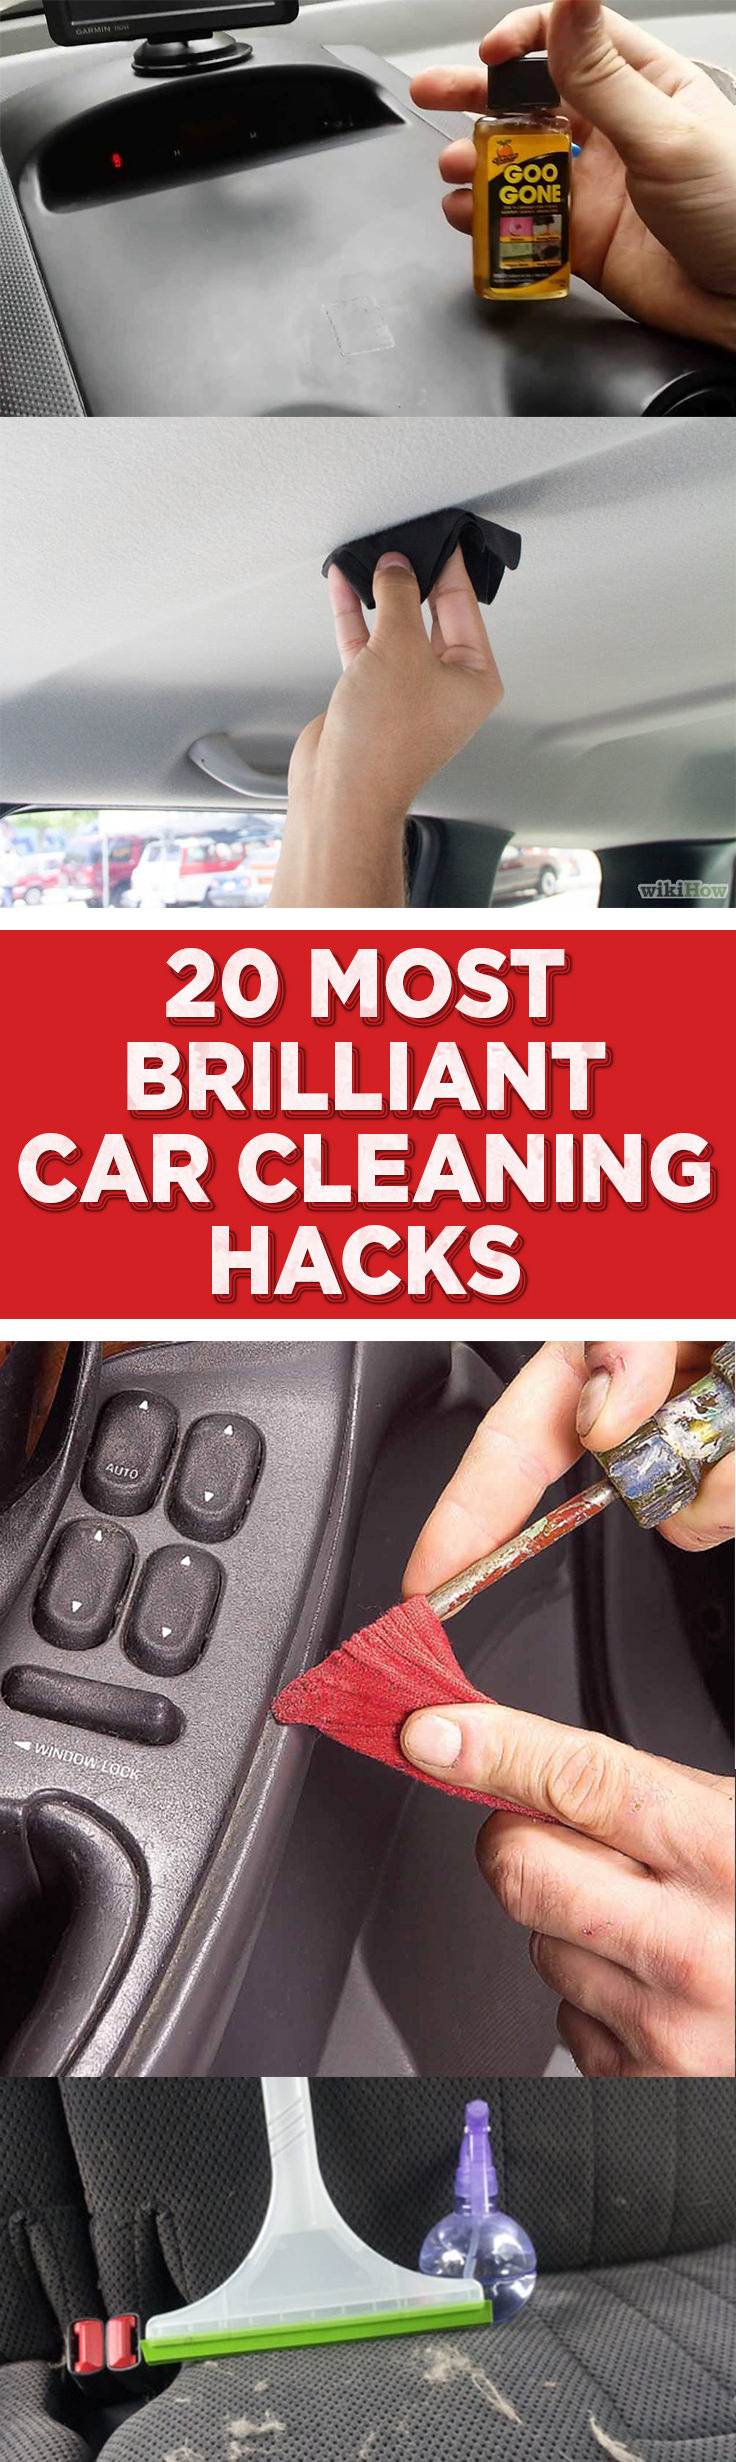 Cleaning up your favorite car is important but it must not be time-consuming and difficult, these some of the most brilliant car cleaning hacks will make it easier.